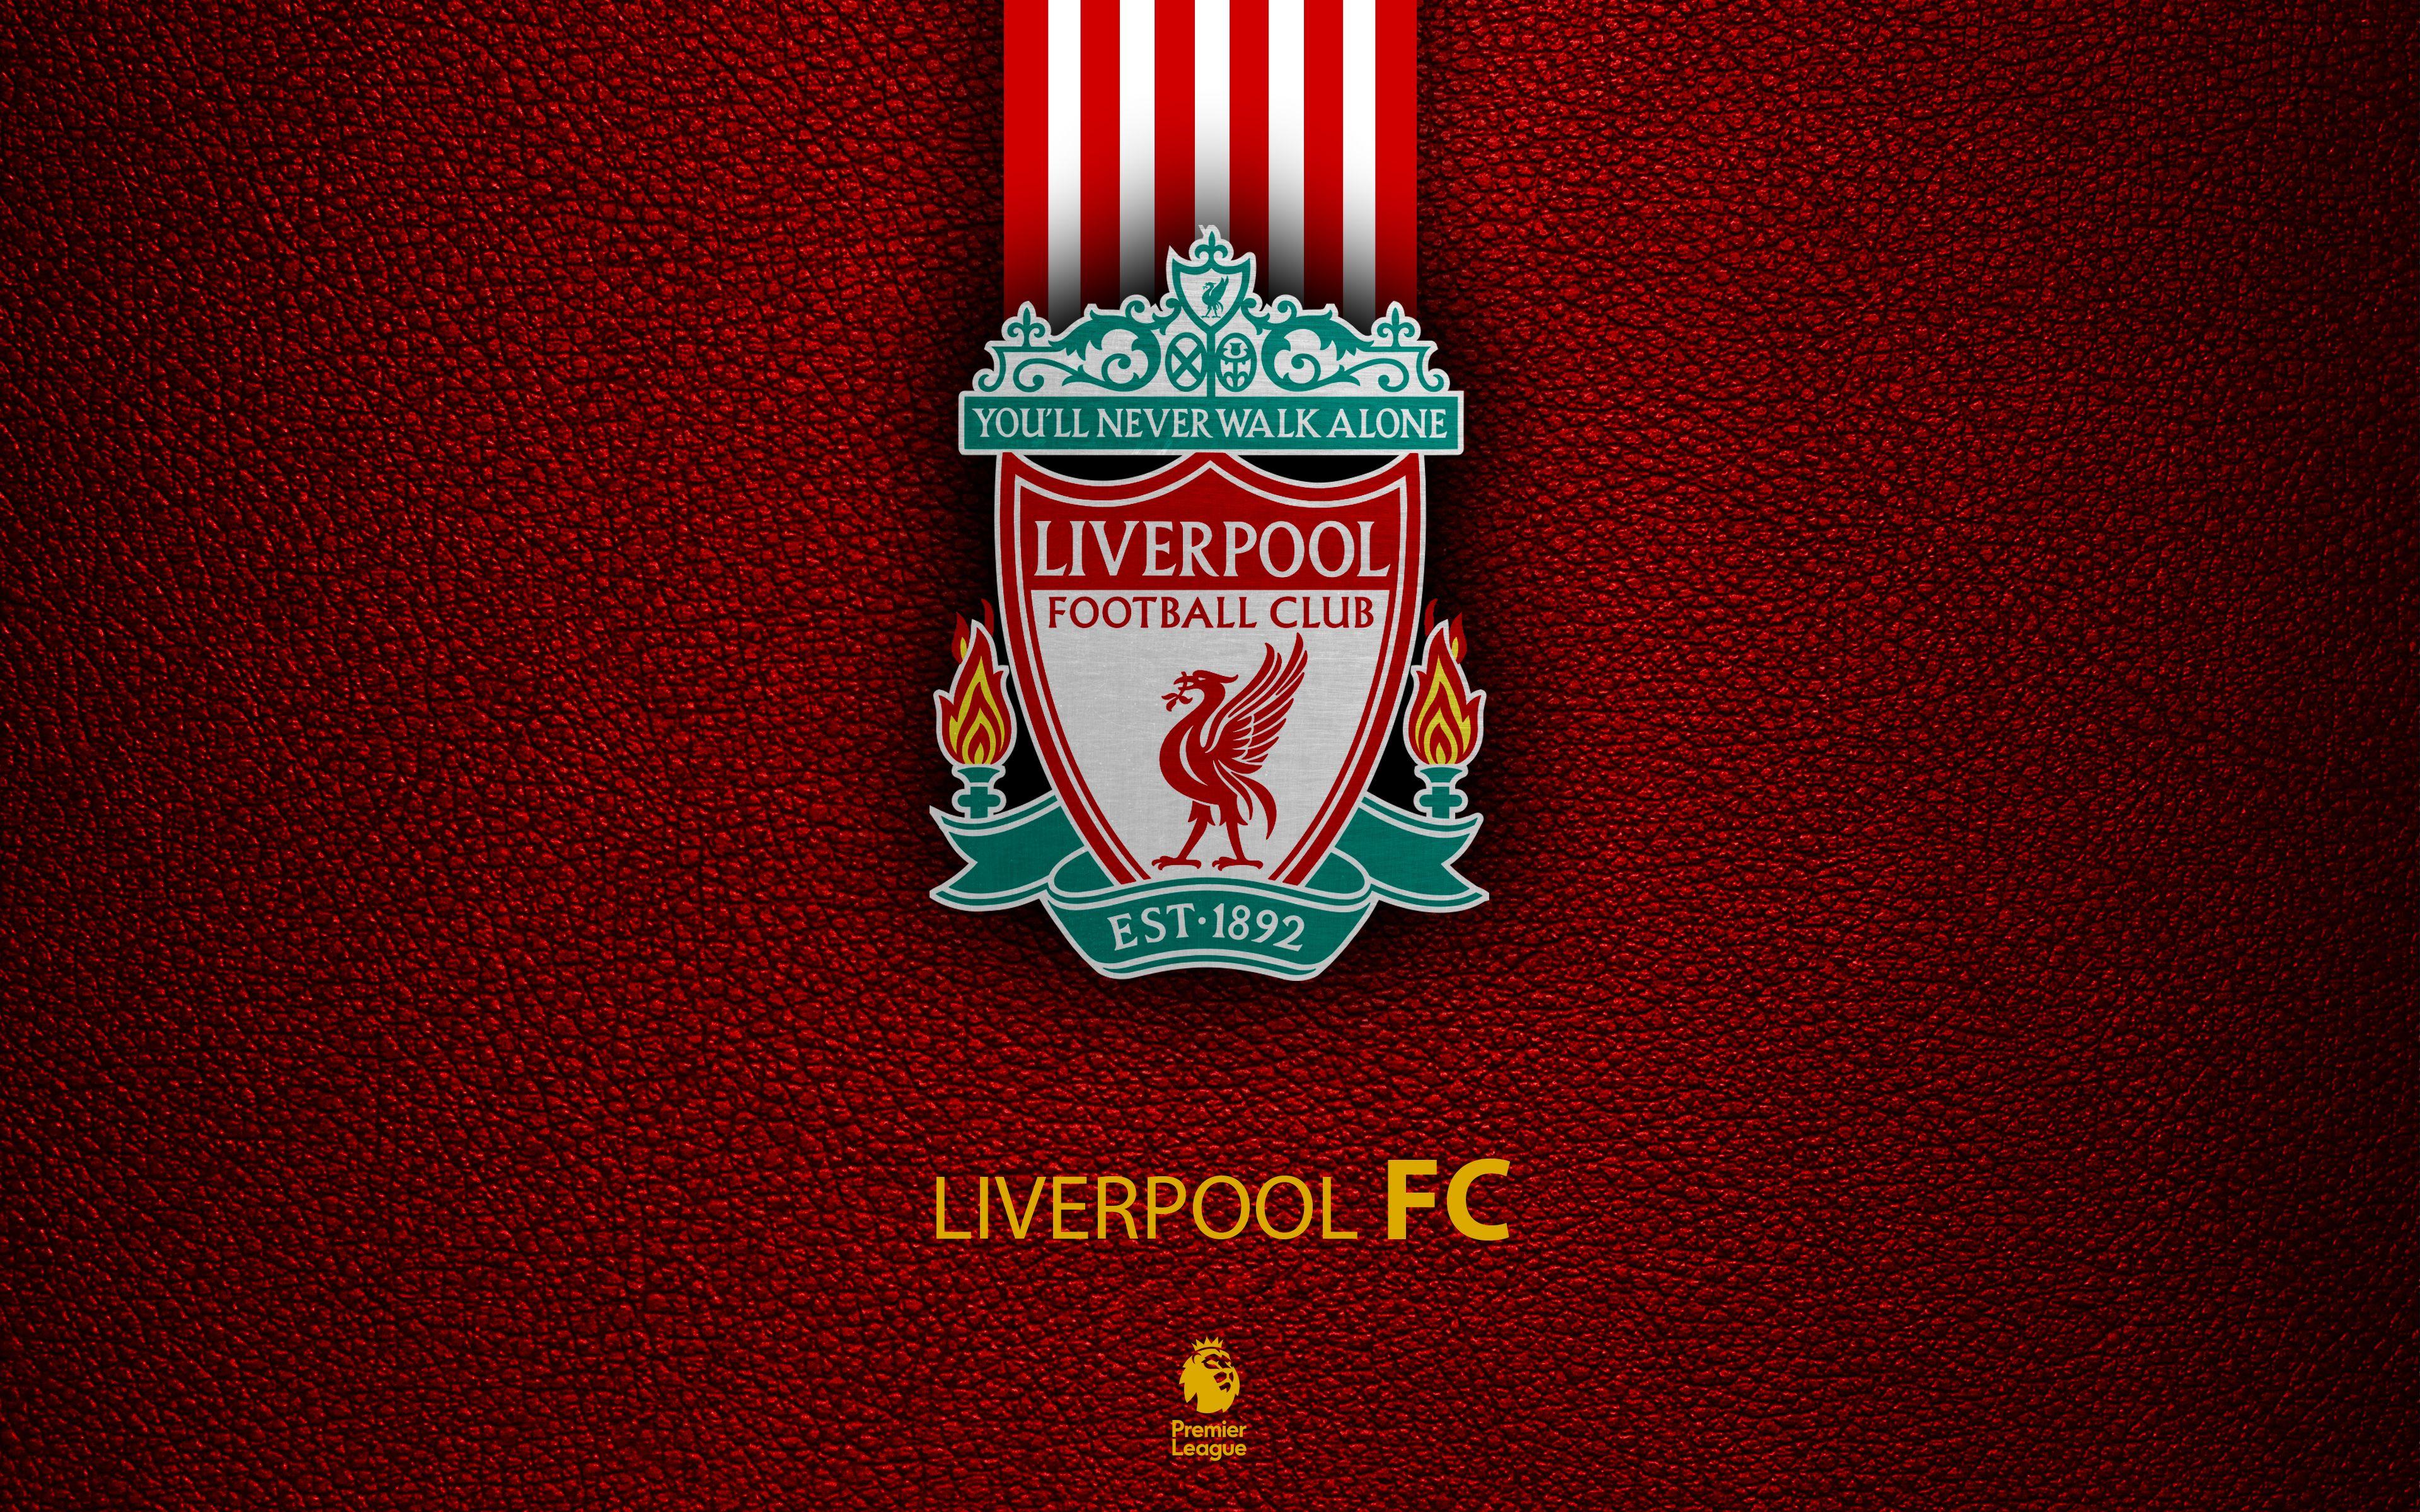 Liverpool Fc 4k Wallpapers Top Free Liverpool Fc 4k Backgrounds Wallpaperaccess Cool 4k wallpapers ultra hd background images in 3840×2160 resolution. liverpool fc 4k wallpapers top free